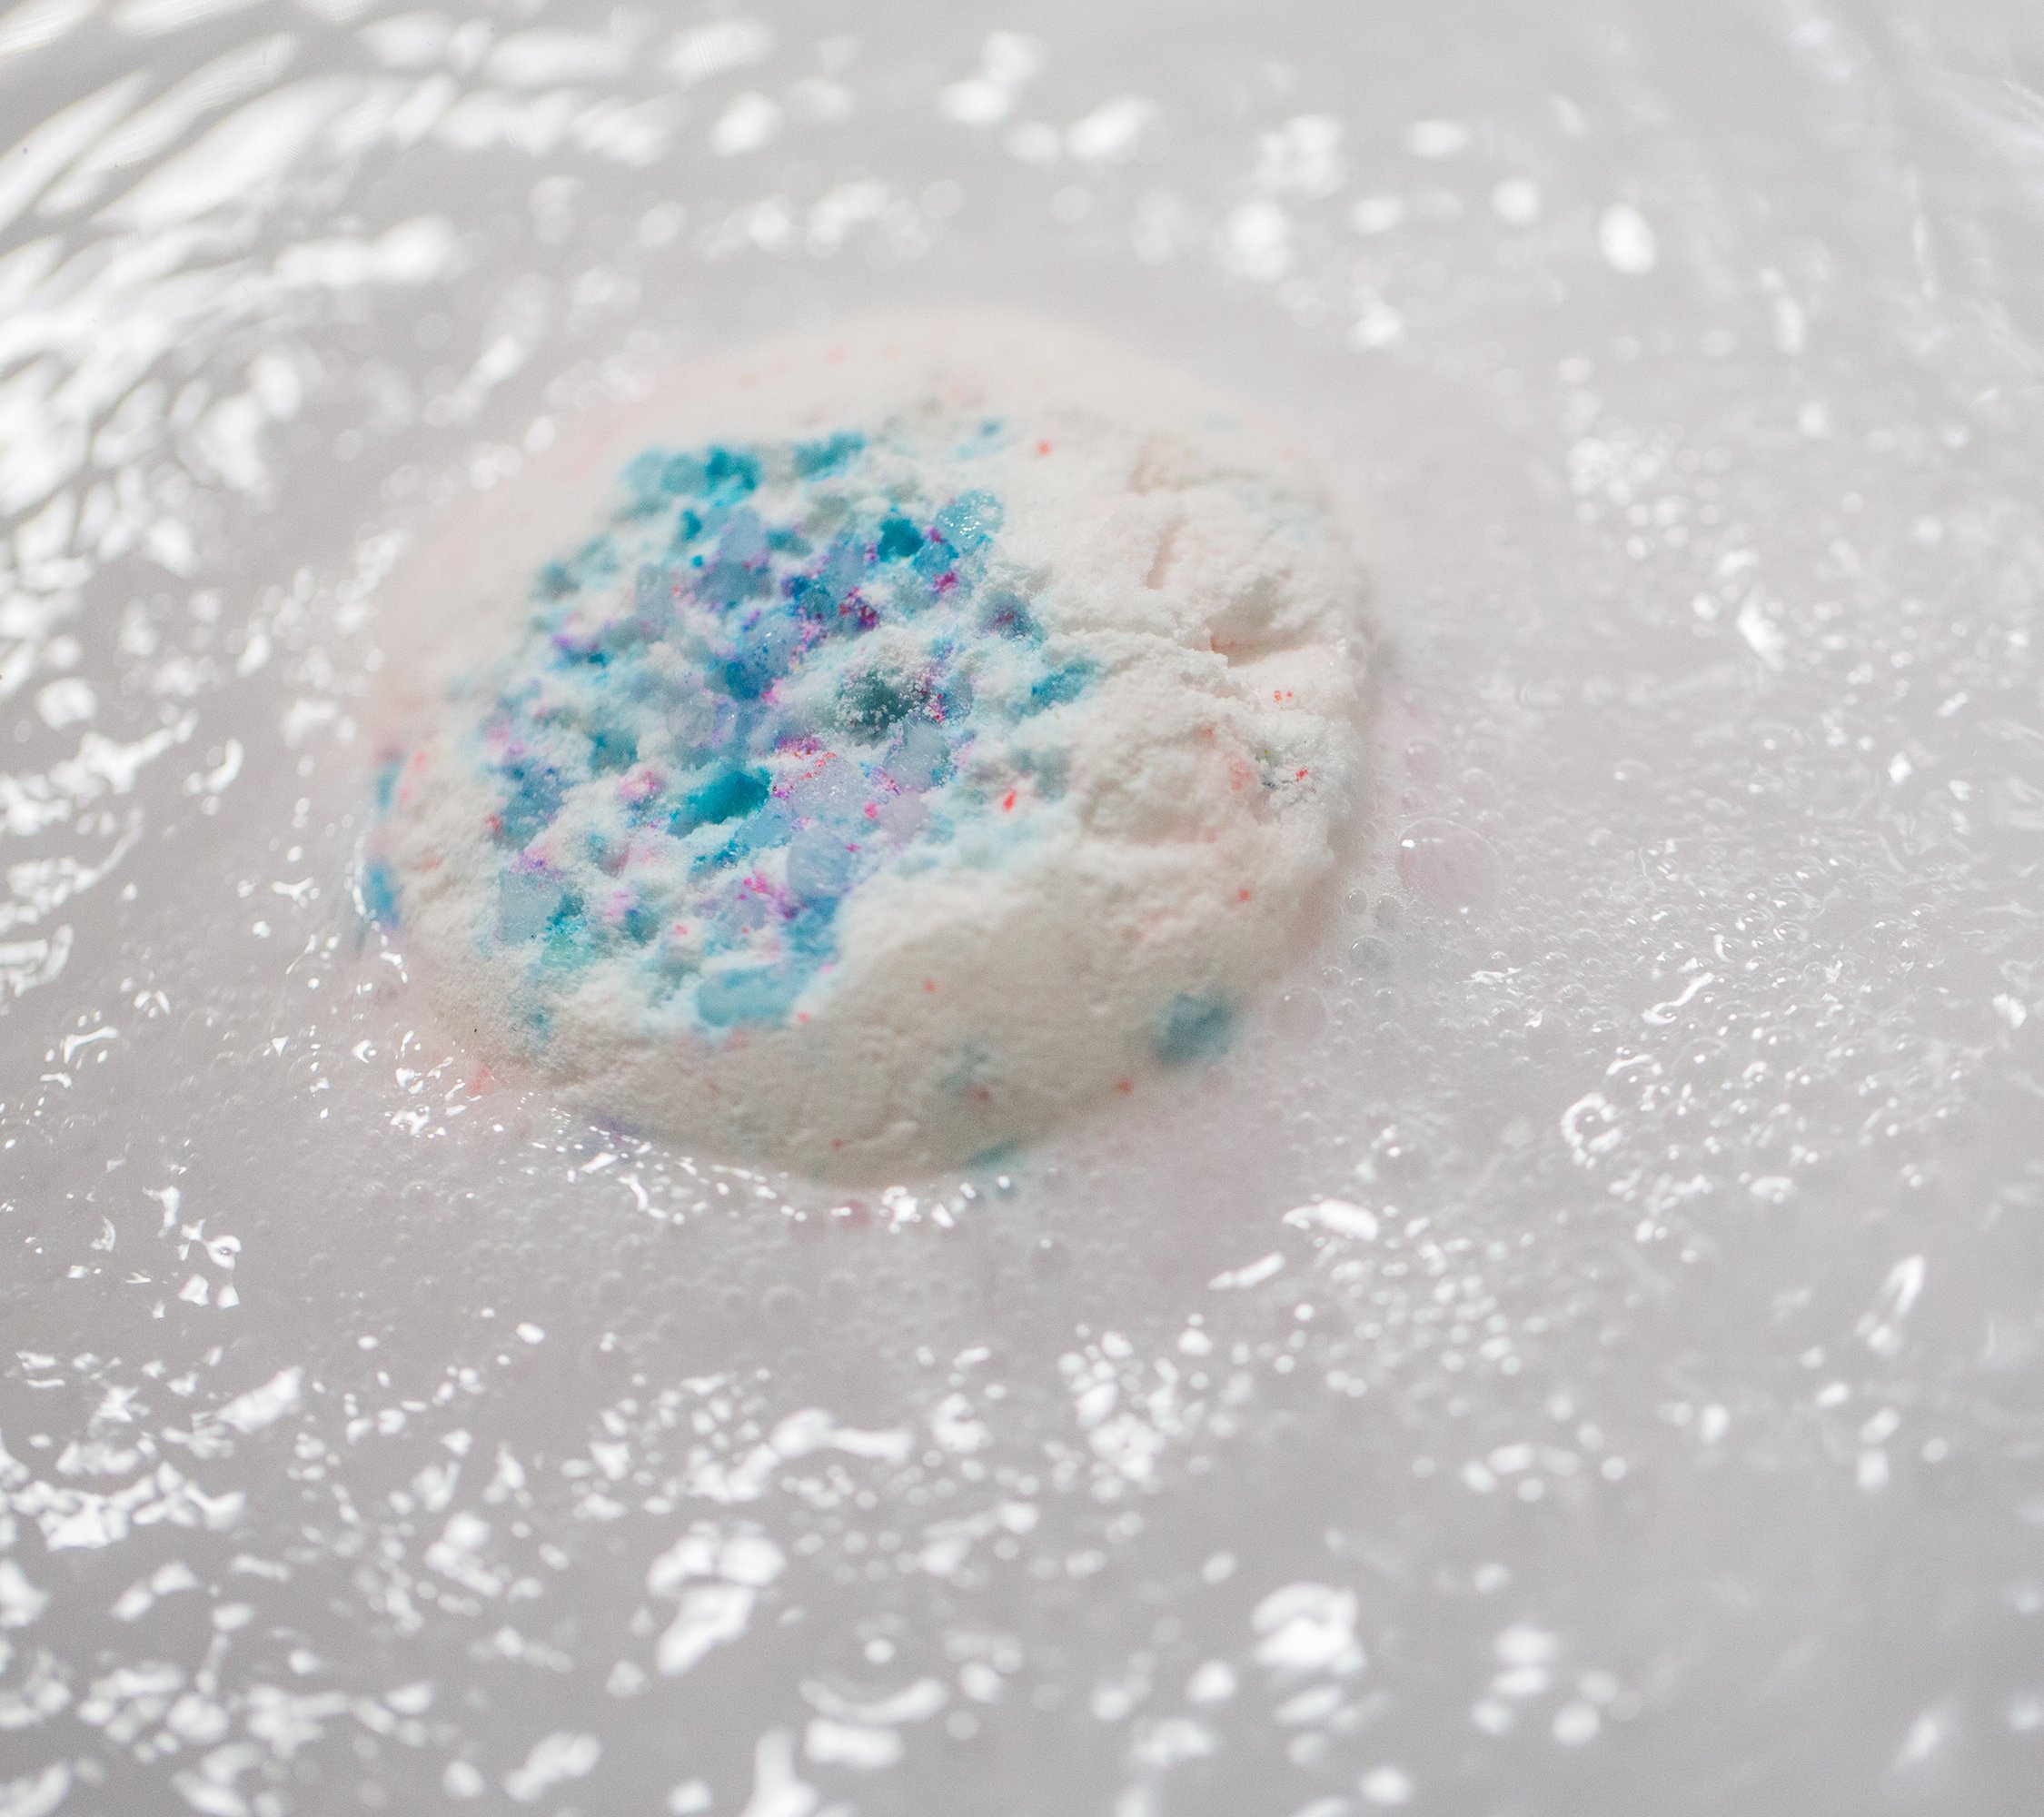 A close-up of a semi-submerged Sakura bath bomb, pink-flecked white with blue-coloured salt, fizzing in milky white waters.